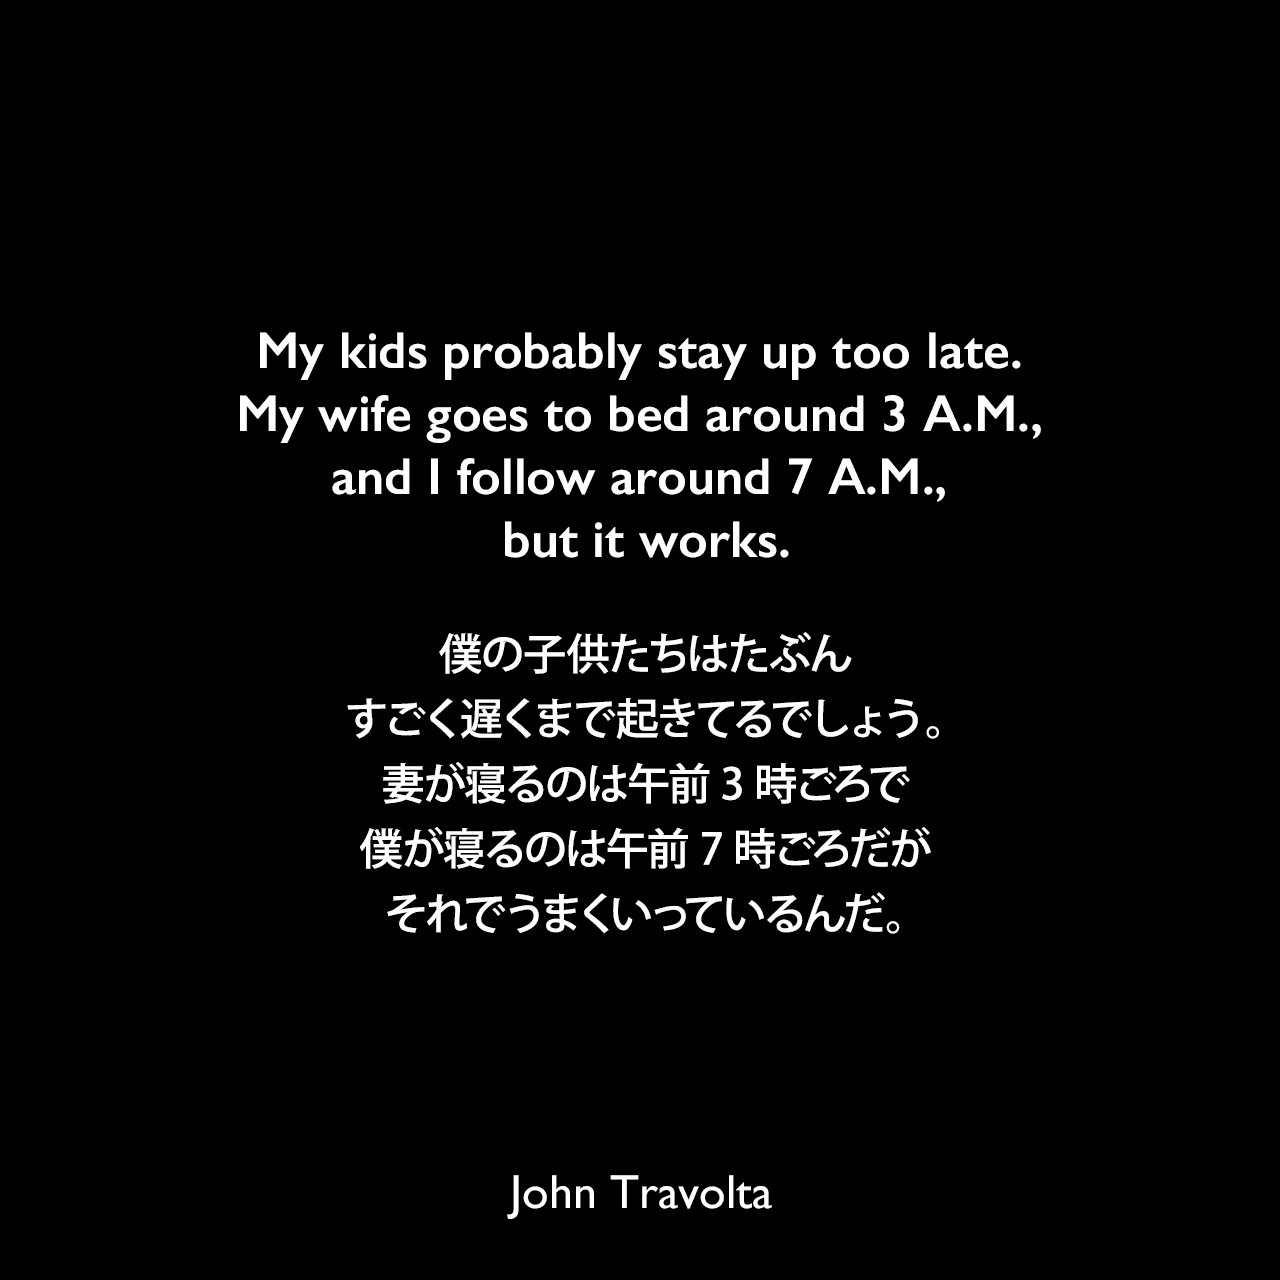 My kids probably stay up too late. My wife goes to bed around 3 A.M., and I follow around 7 A.M., but it works.僕の子供たちはたぶんすごく遅くまで起きてるでしょう。妻が寝るのは午前3時ごろで僕が寝るのは午前7時ごろだが、それでうまくいっているんだ。John Travolta